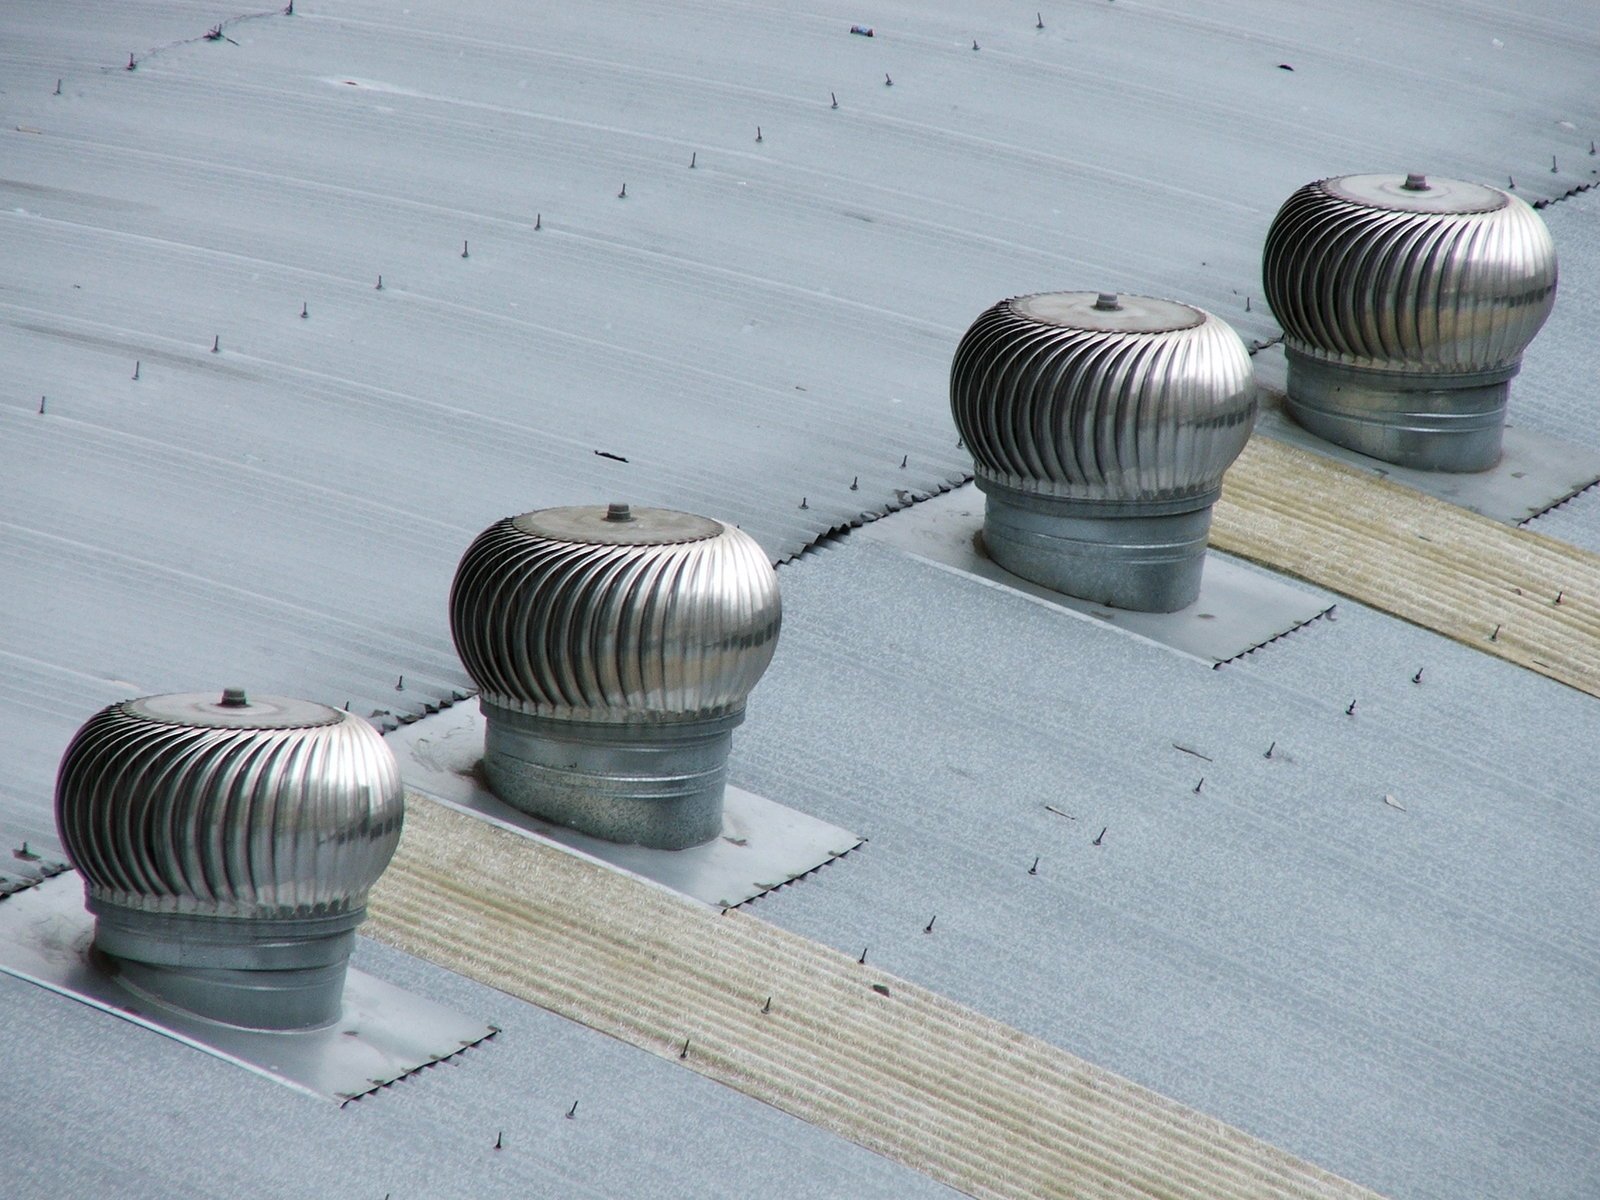 three metallic poles and vents on top of the roof